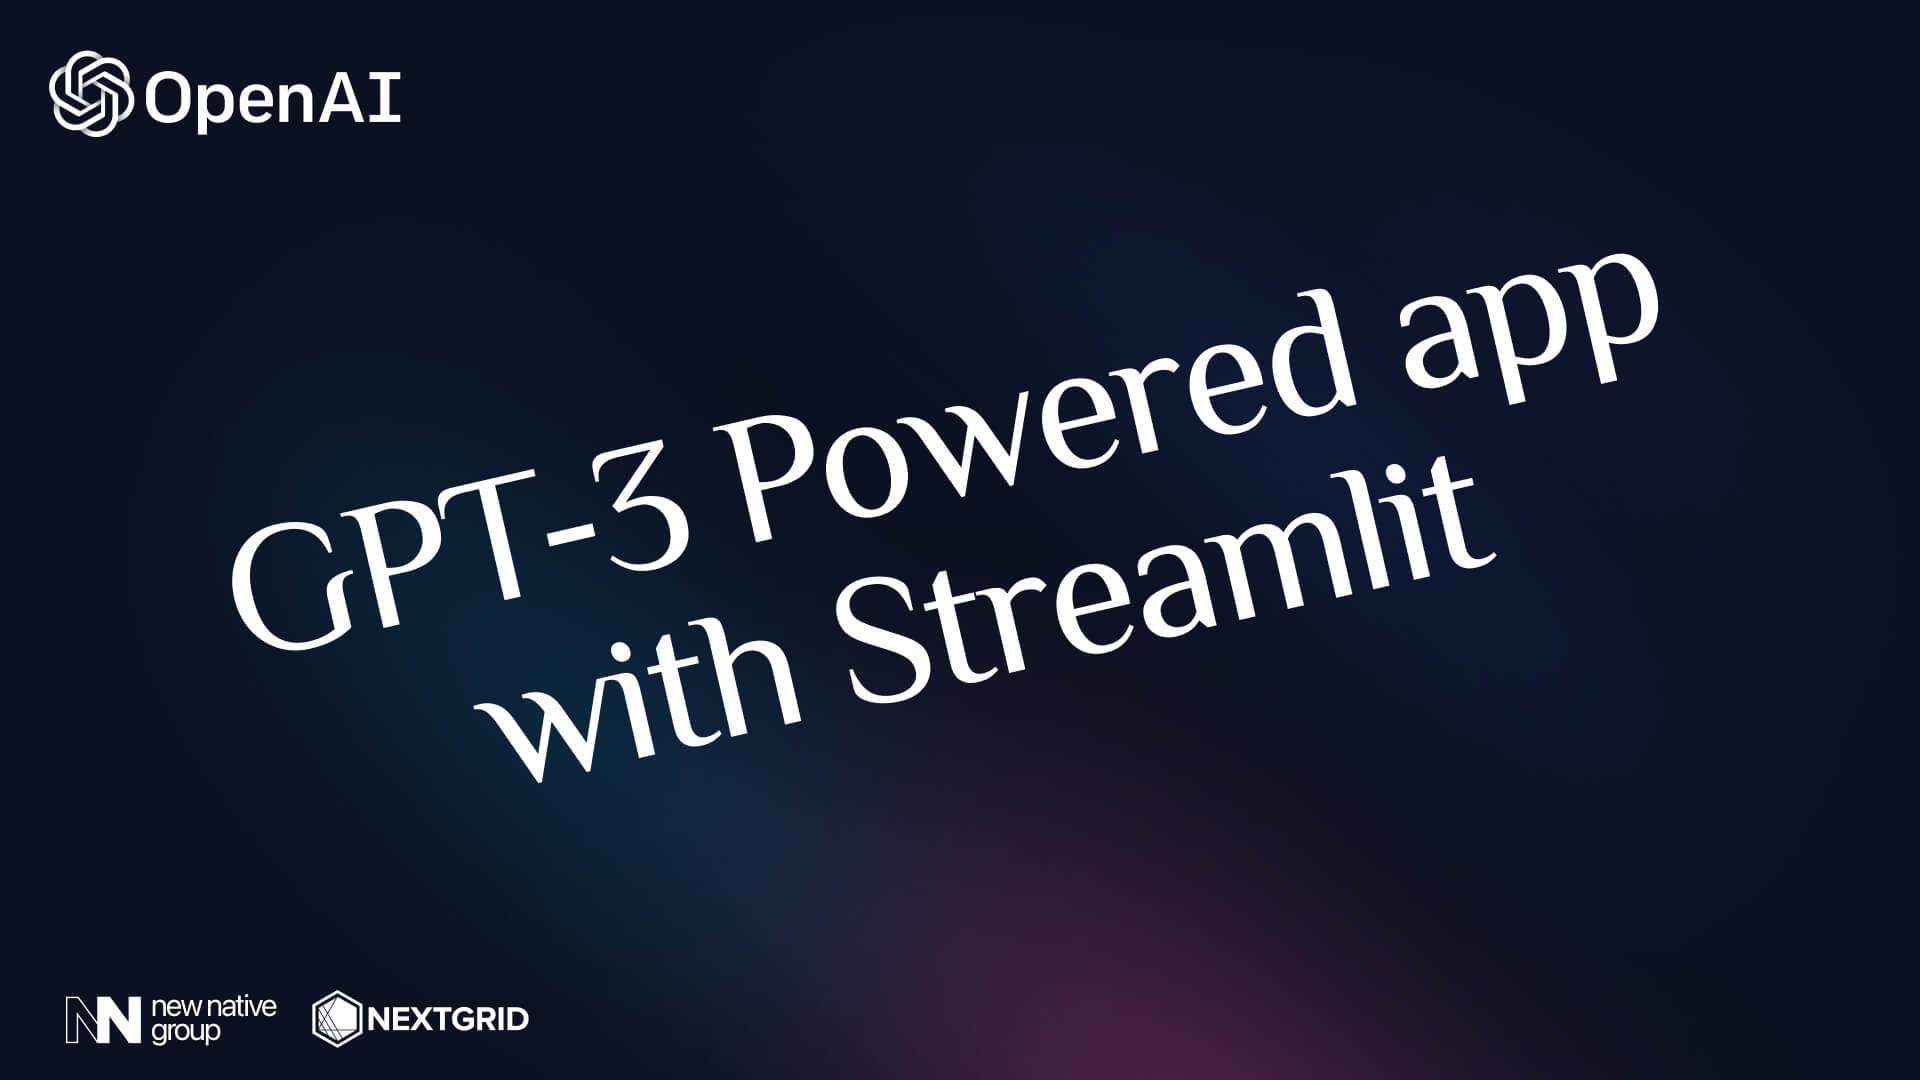 Build your own GPT-3 Powered application using streamlit tutorial